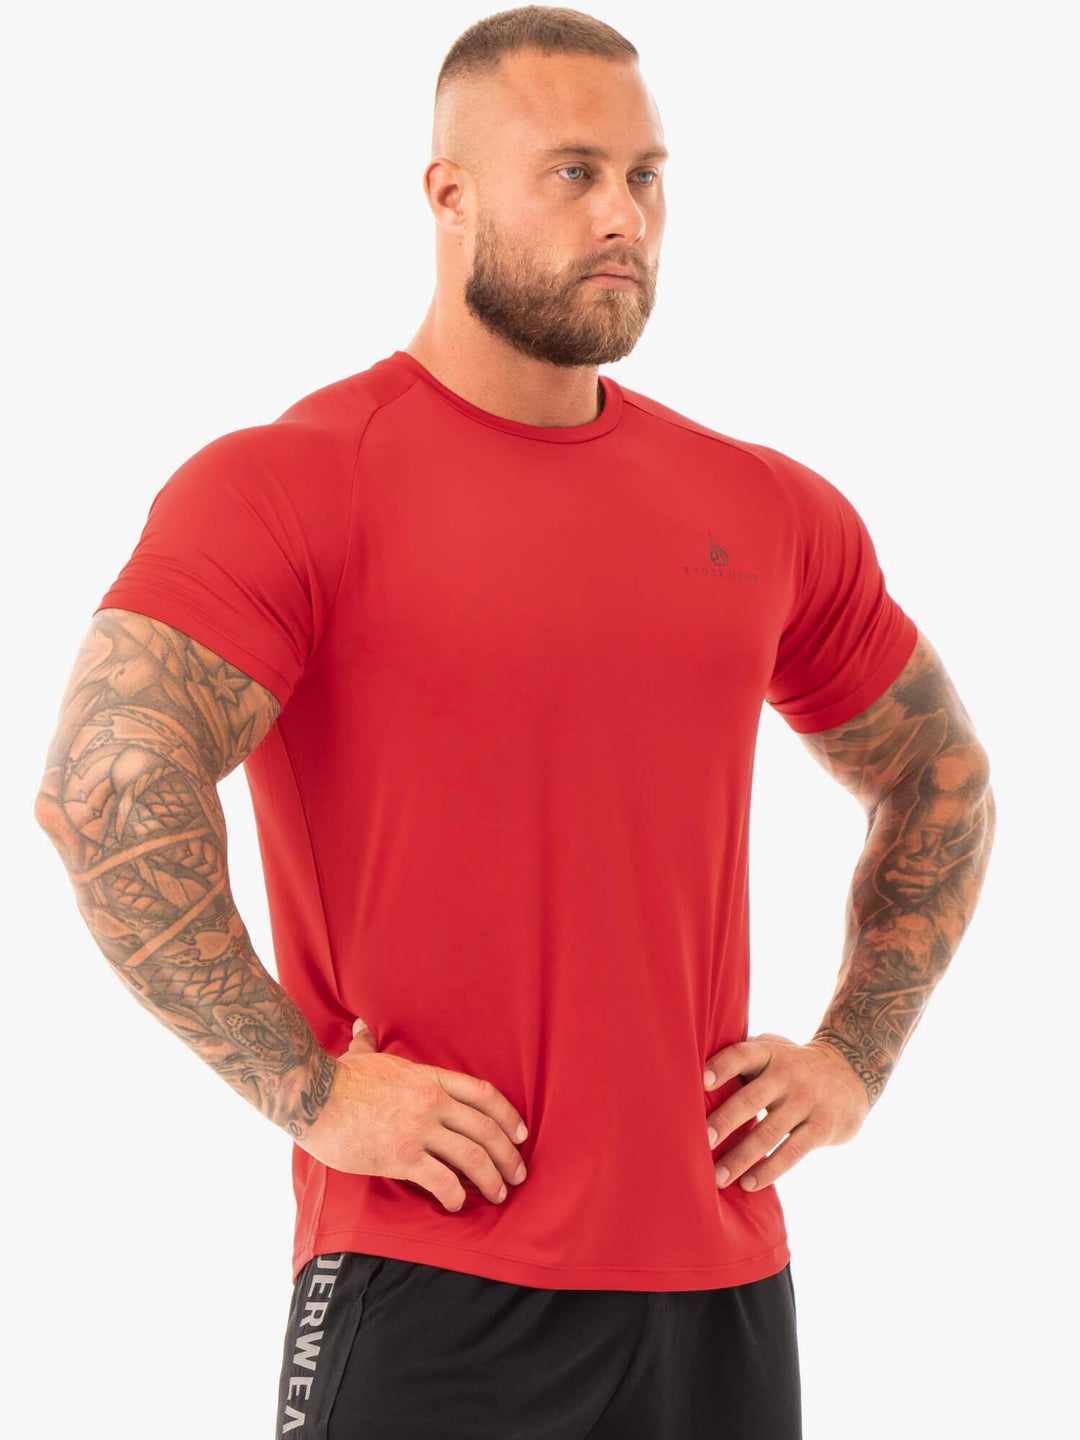 Breeze T-Shirt - Red Clothing Ryderwear 